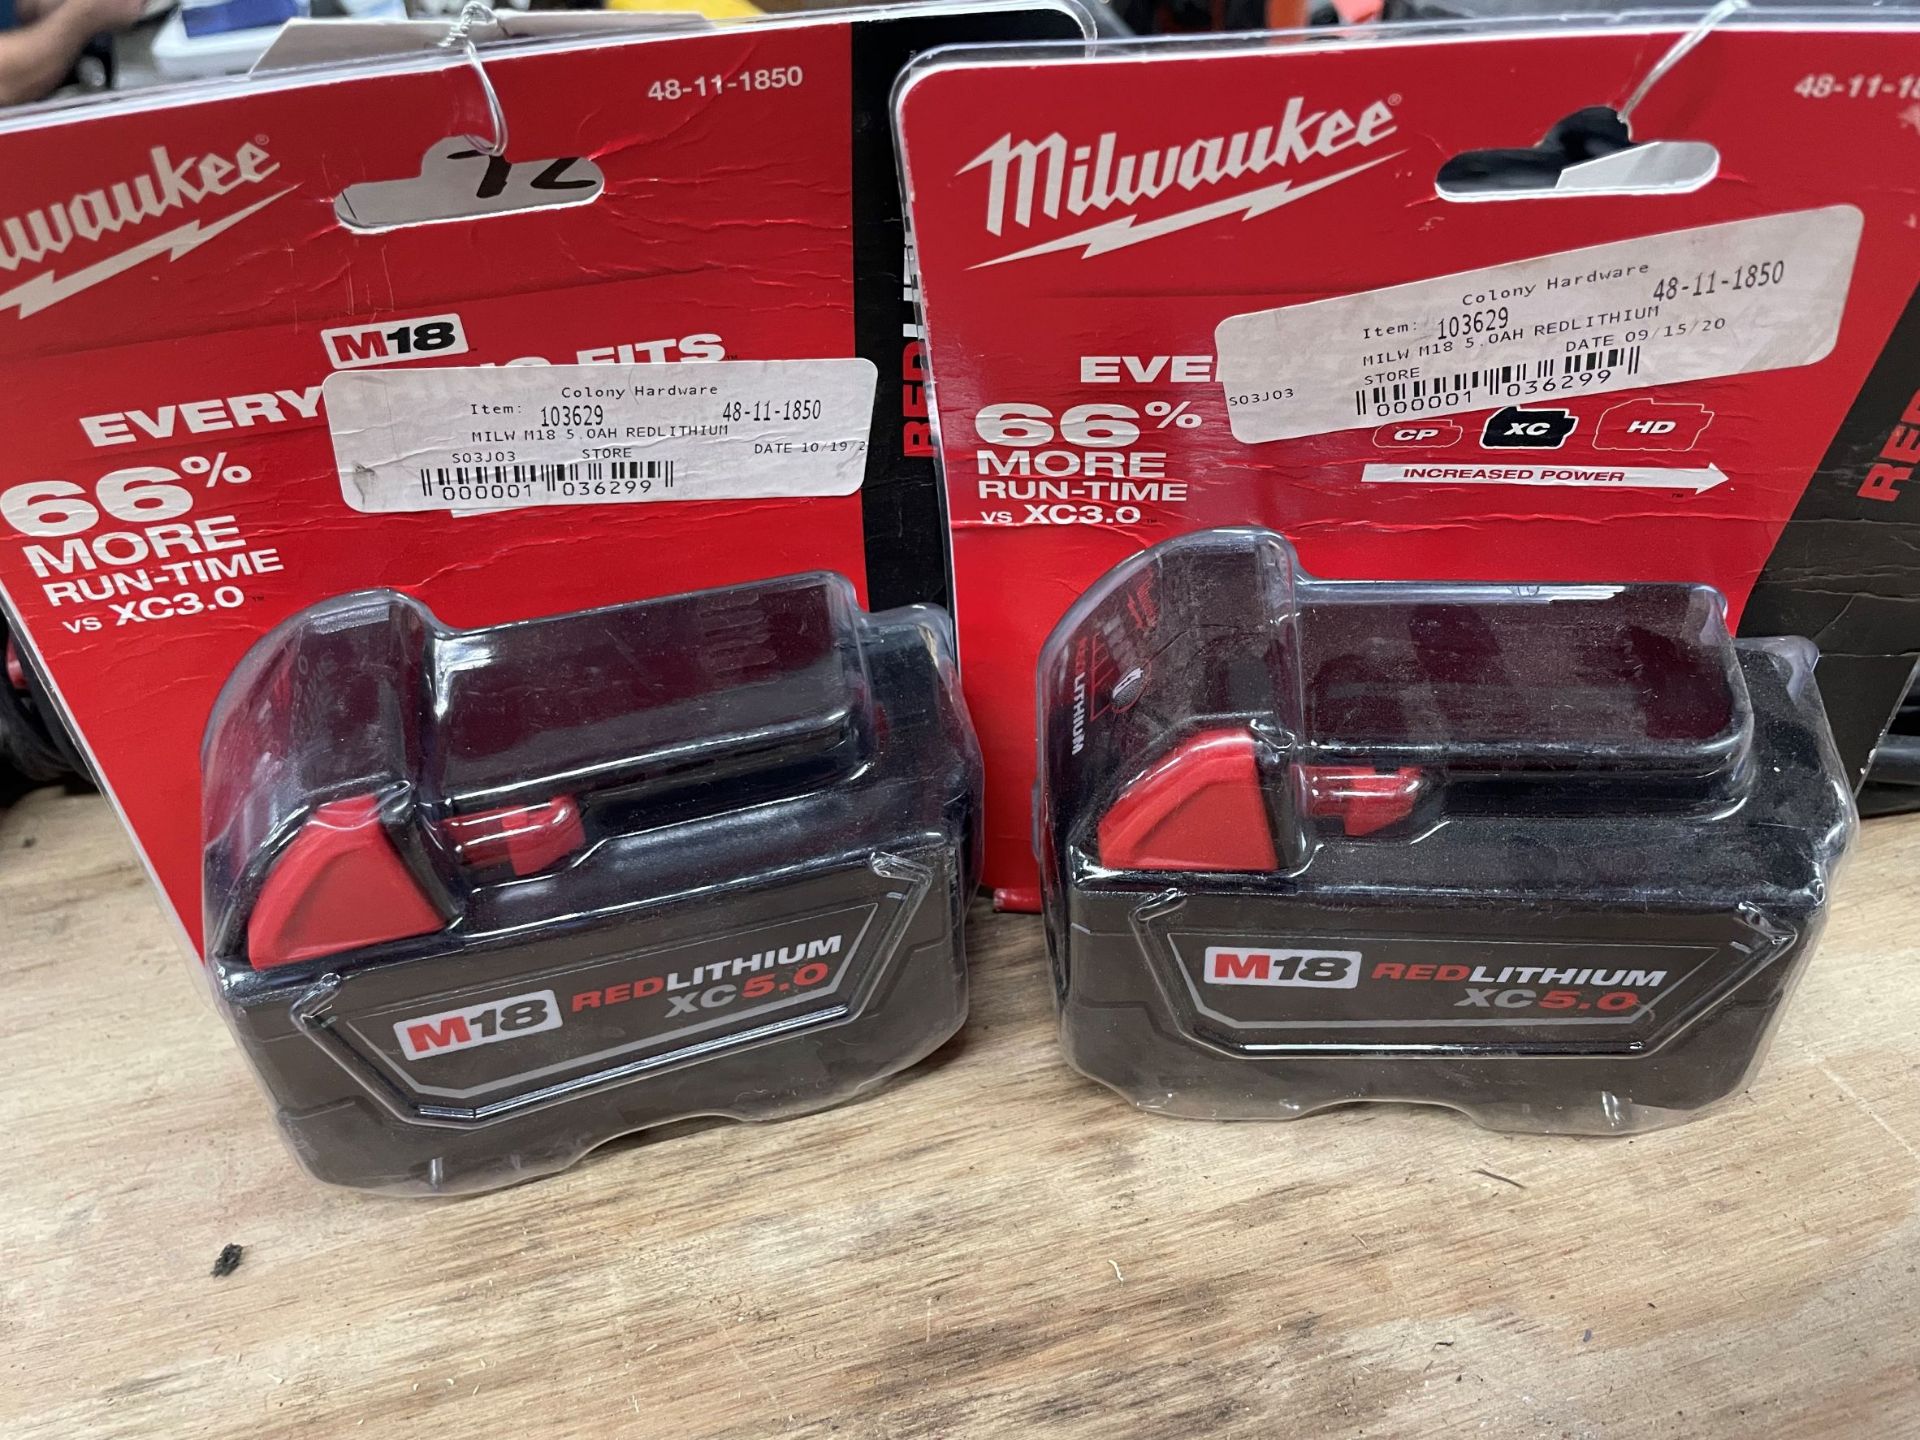 (2) Milwaukee Red Lithium XC 5.0 M18 rechargeable Batteries (NIB) w/ (2) Chargers